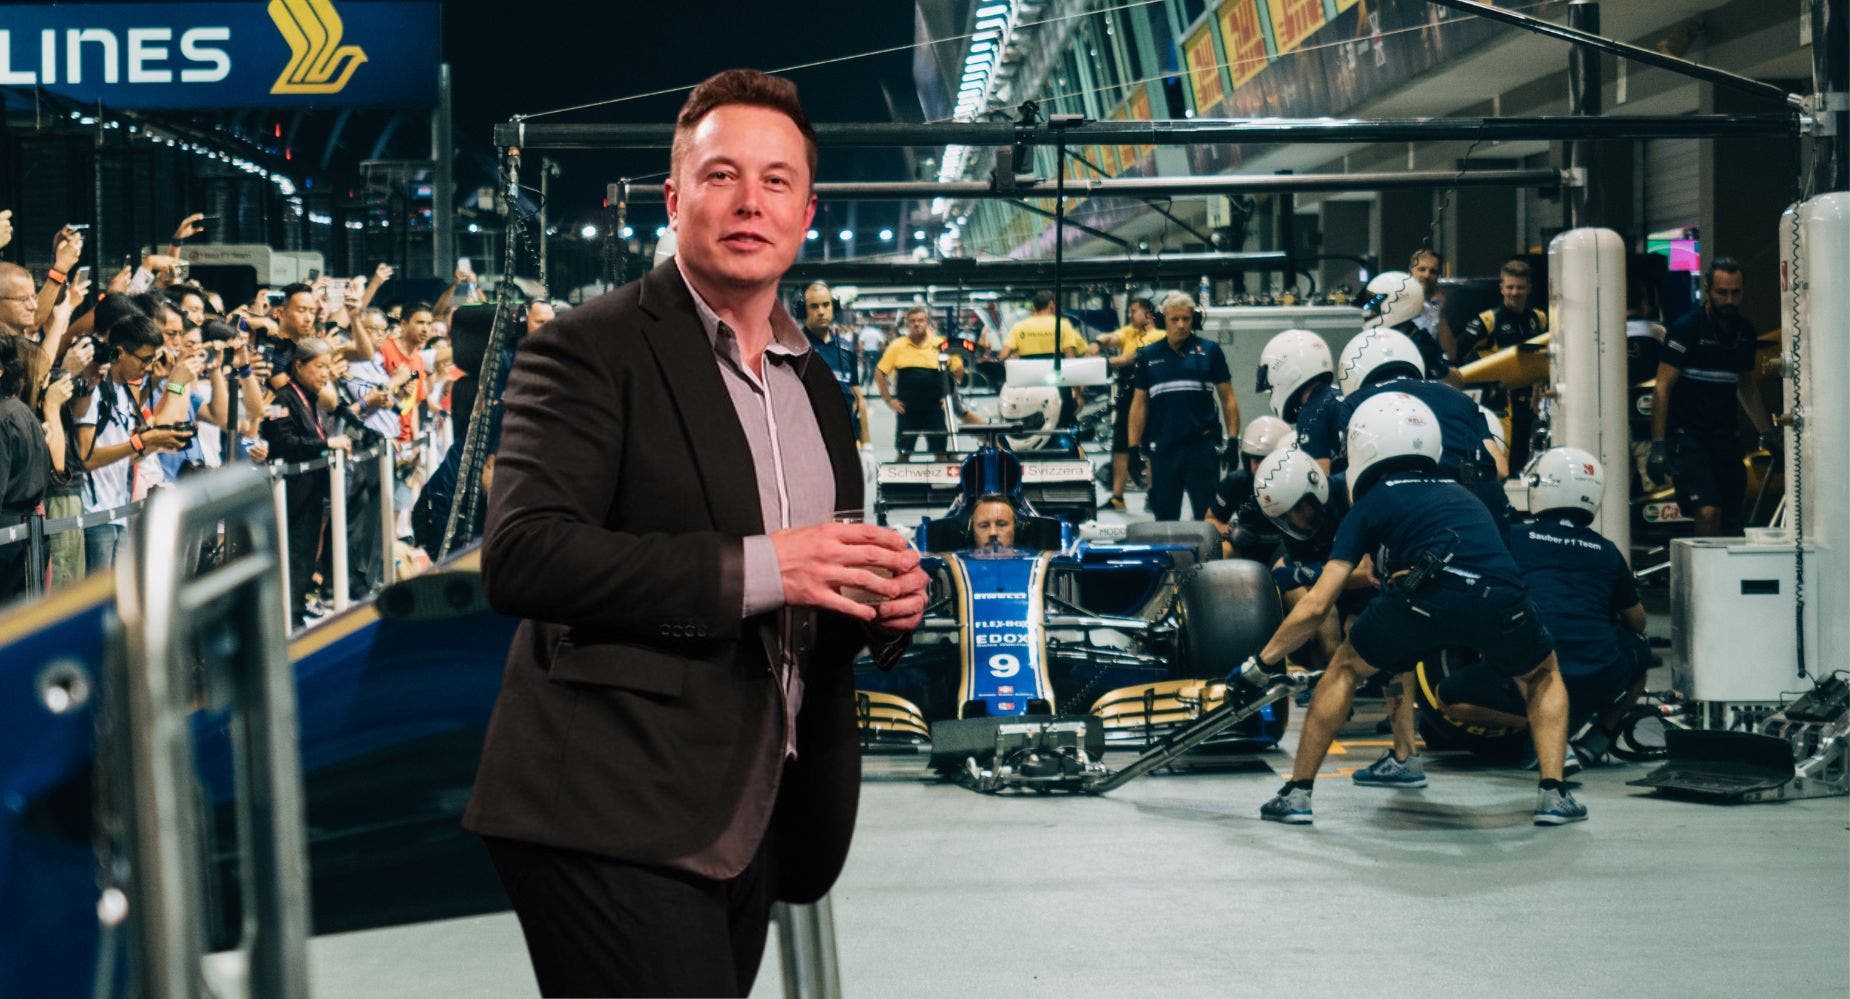 Elon Musk Says Tesla To Provide Same-Hour Service To Vehicles: 'Applying Formula 1 Pit Crew Techniques'